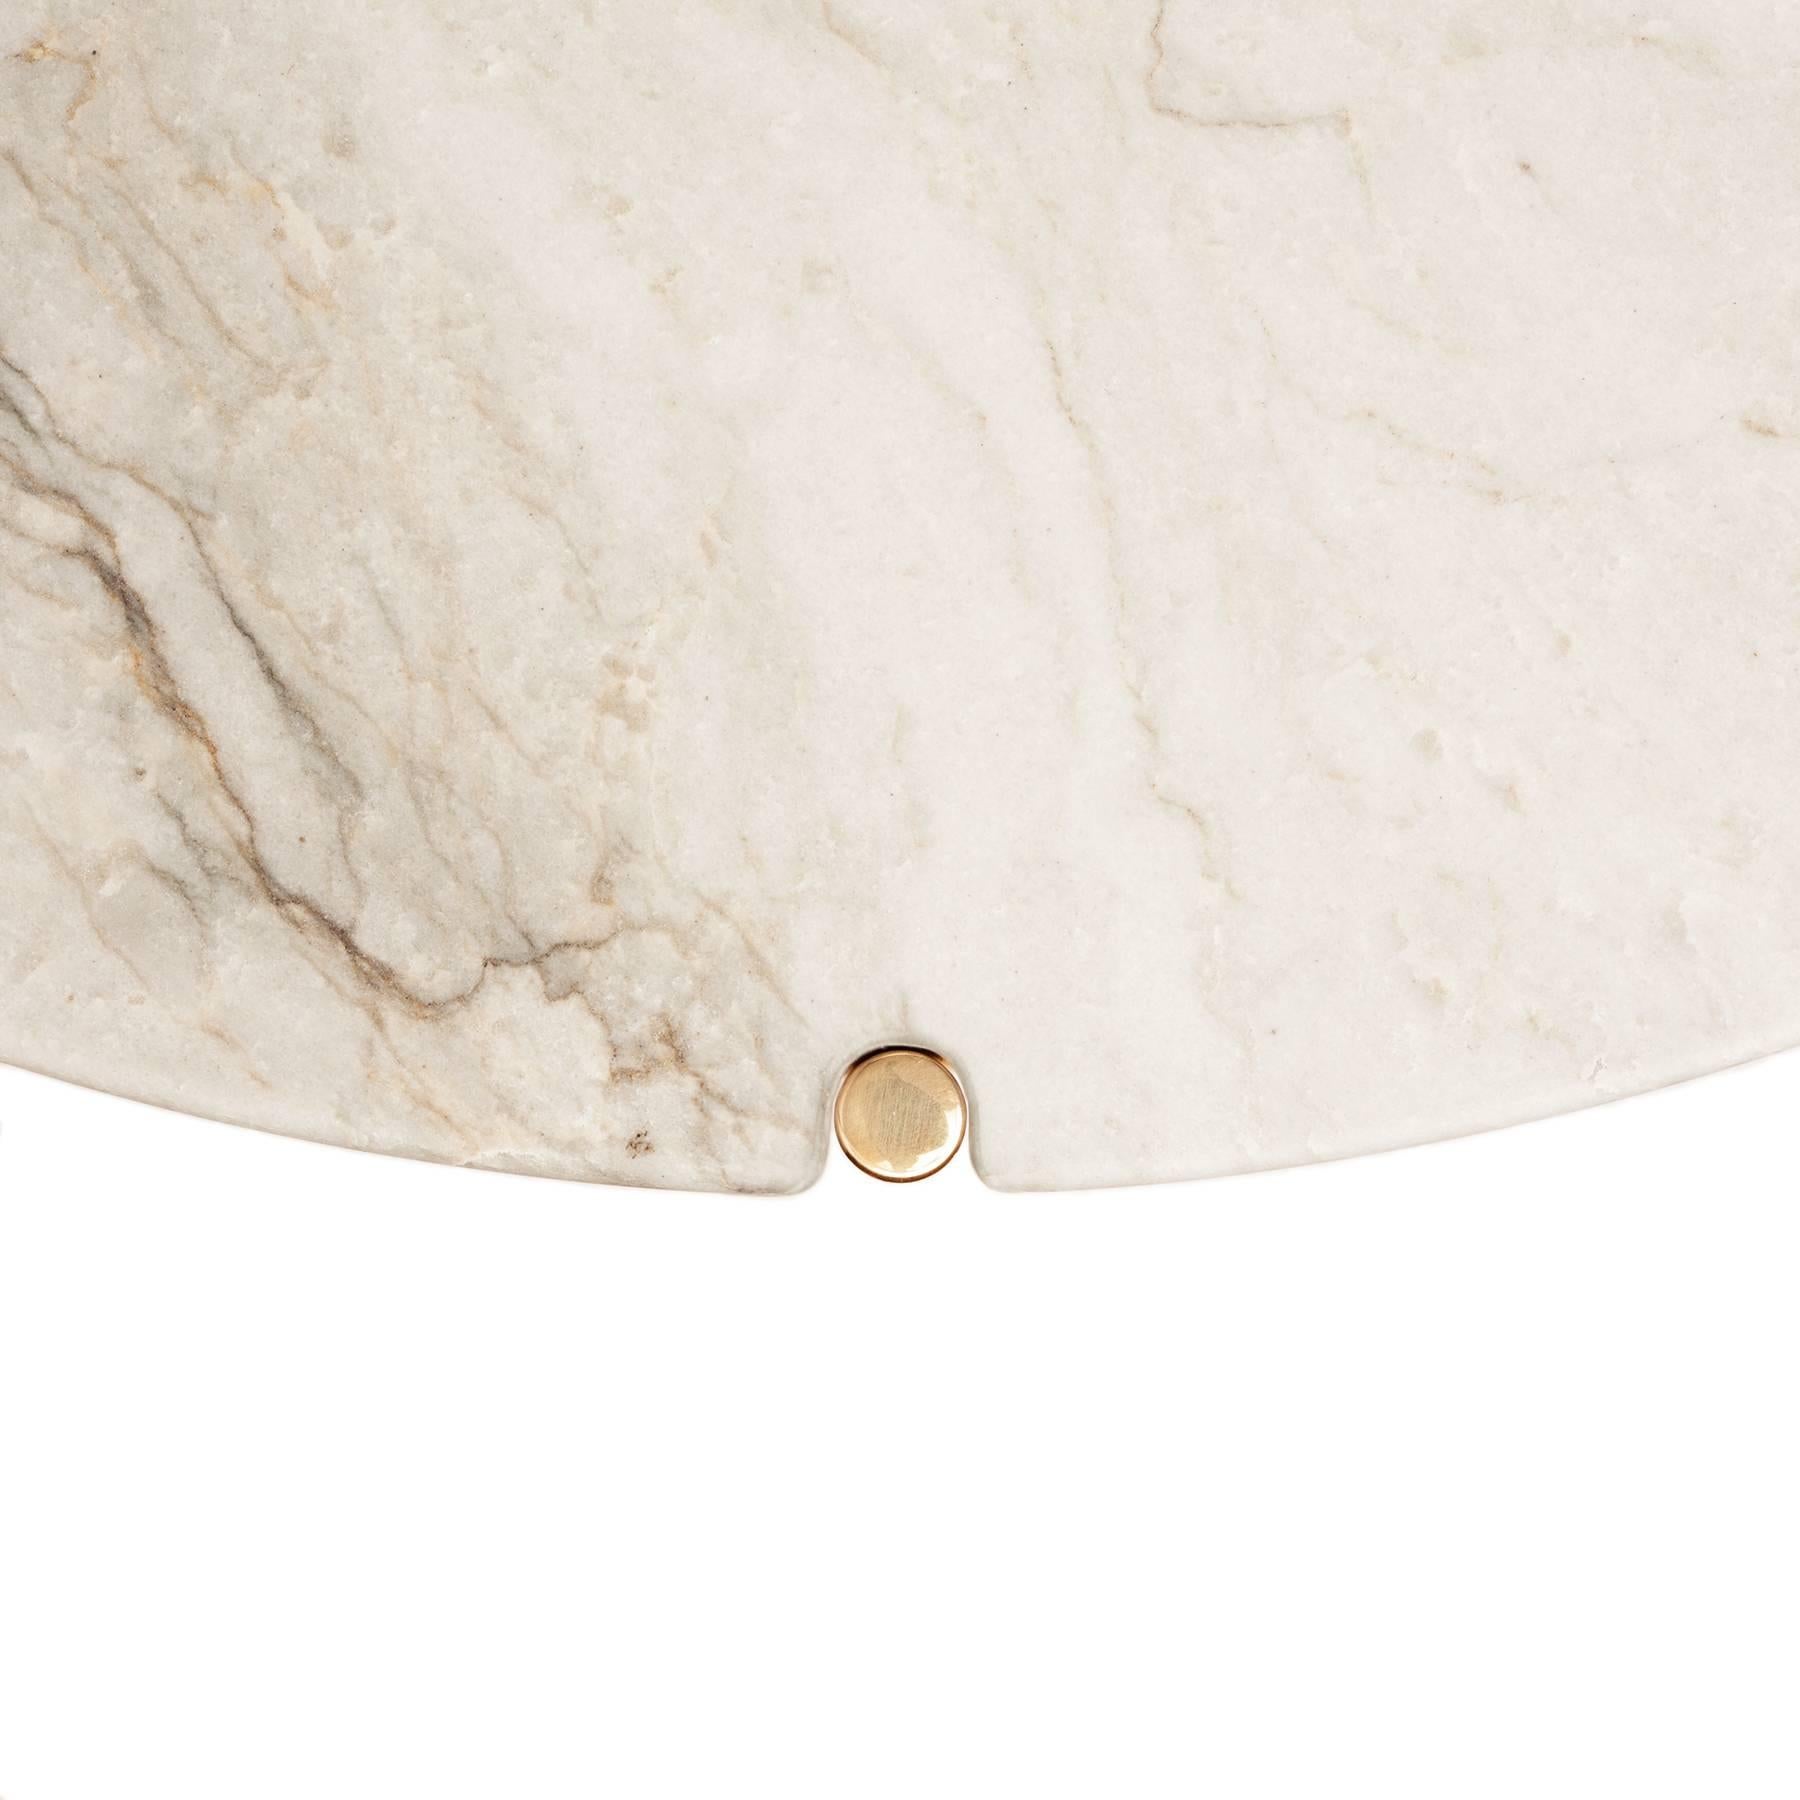 The CA32S entry table is defined by the subtle expression of its frame through notches pierced into its top. 

Available in several custom material and finish options - honed quartzite top / polished, unlacquered brass frame presented